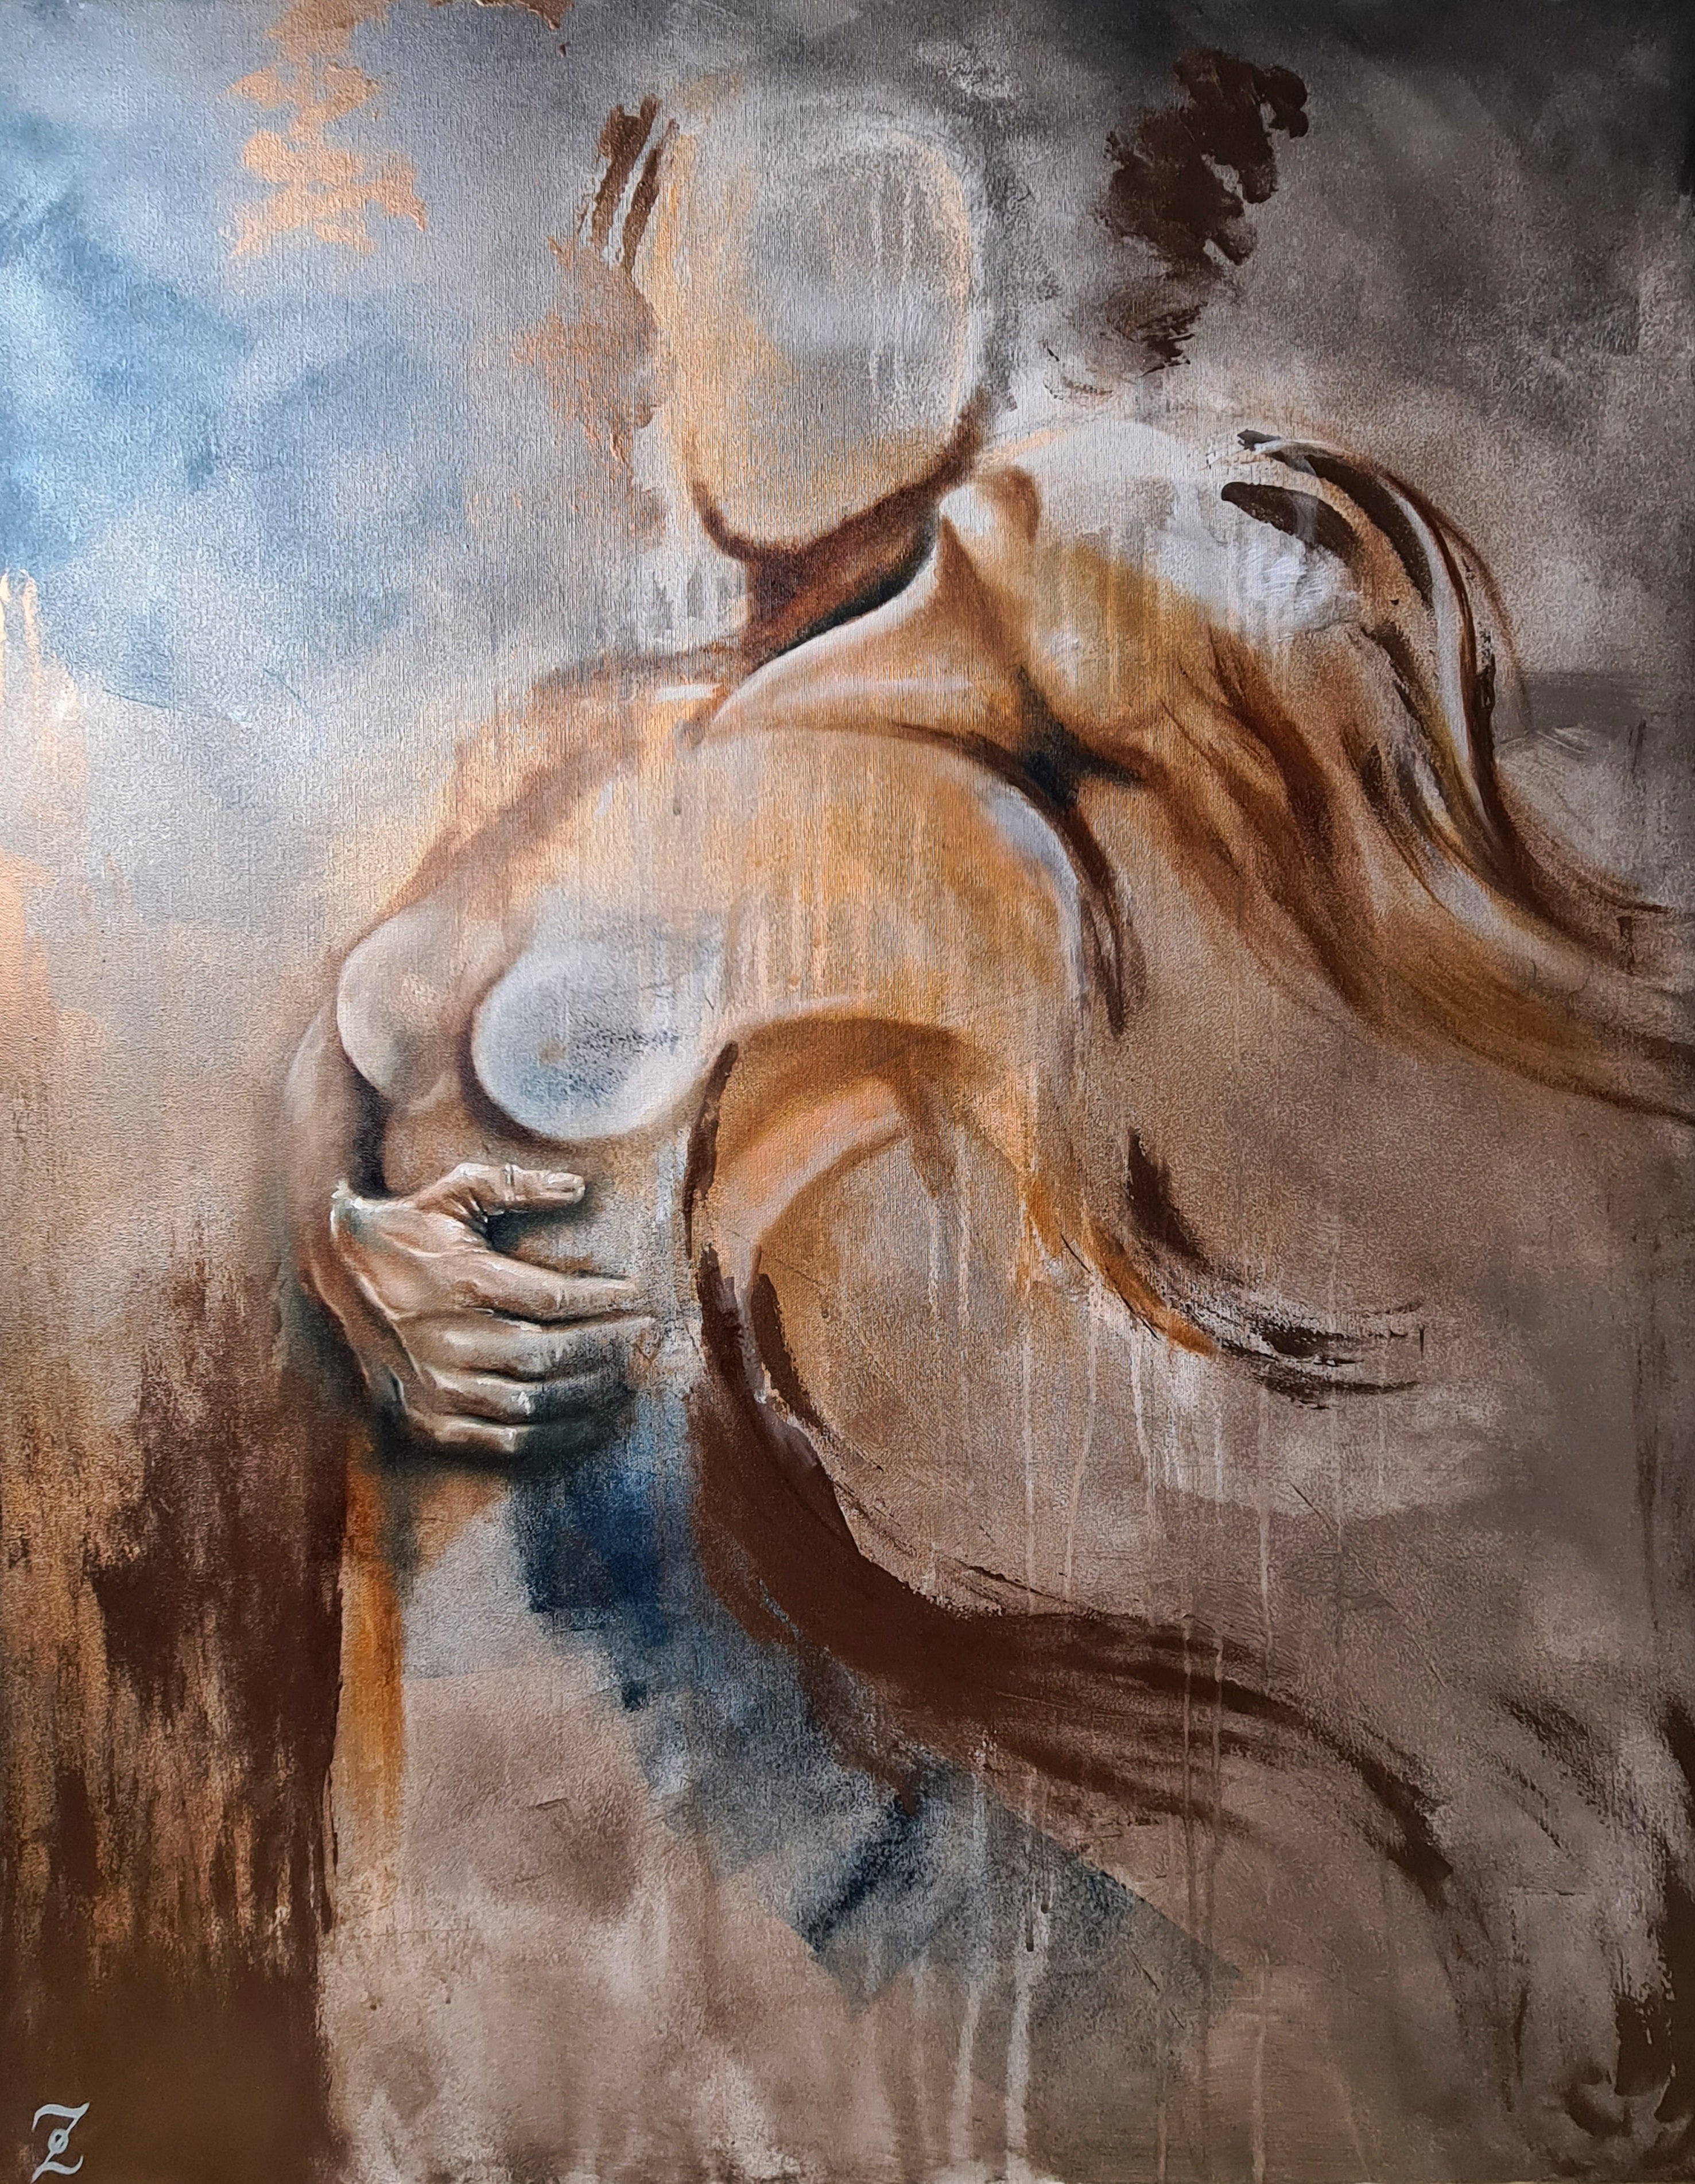 Original painting on canvas: "First Dance" 80x100cm